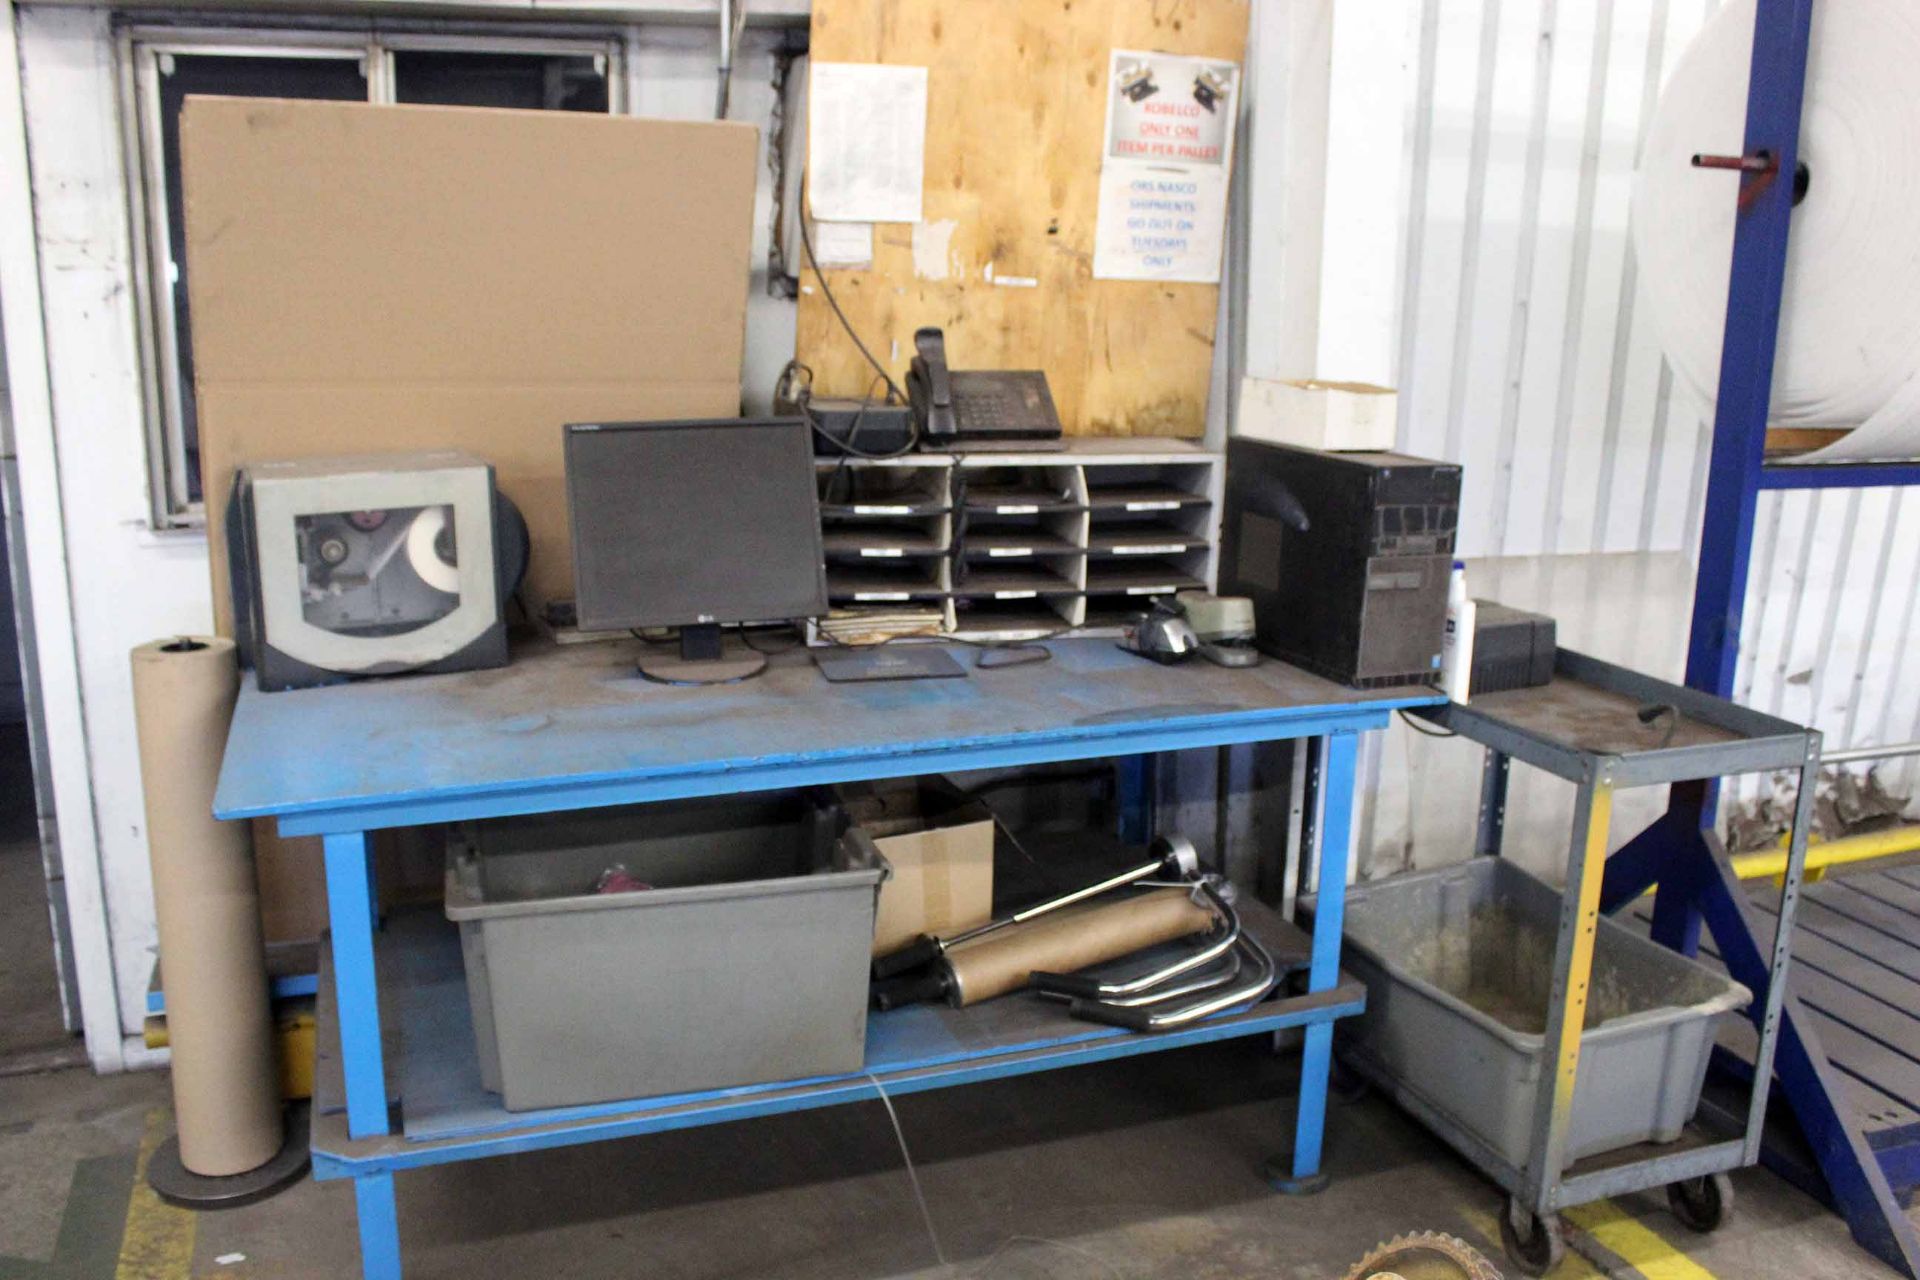 LOT CONTENTS OF SHIPPING & RECEIVING: (2) metal desks, foam wrap, tables, cardboard boxes (Note: